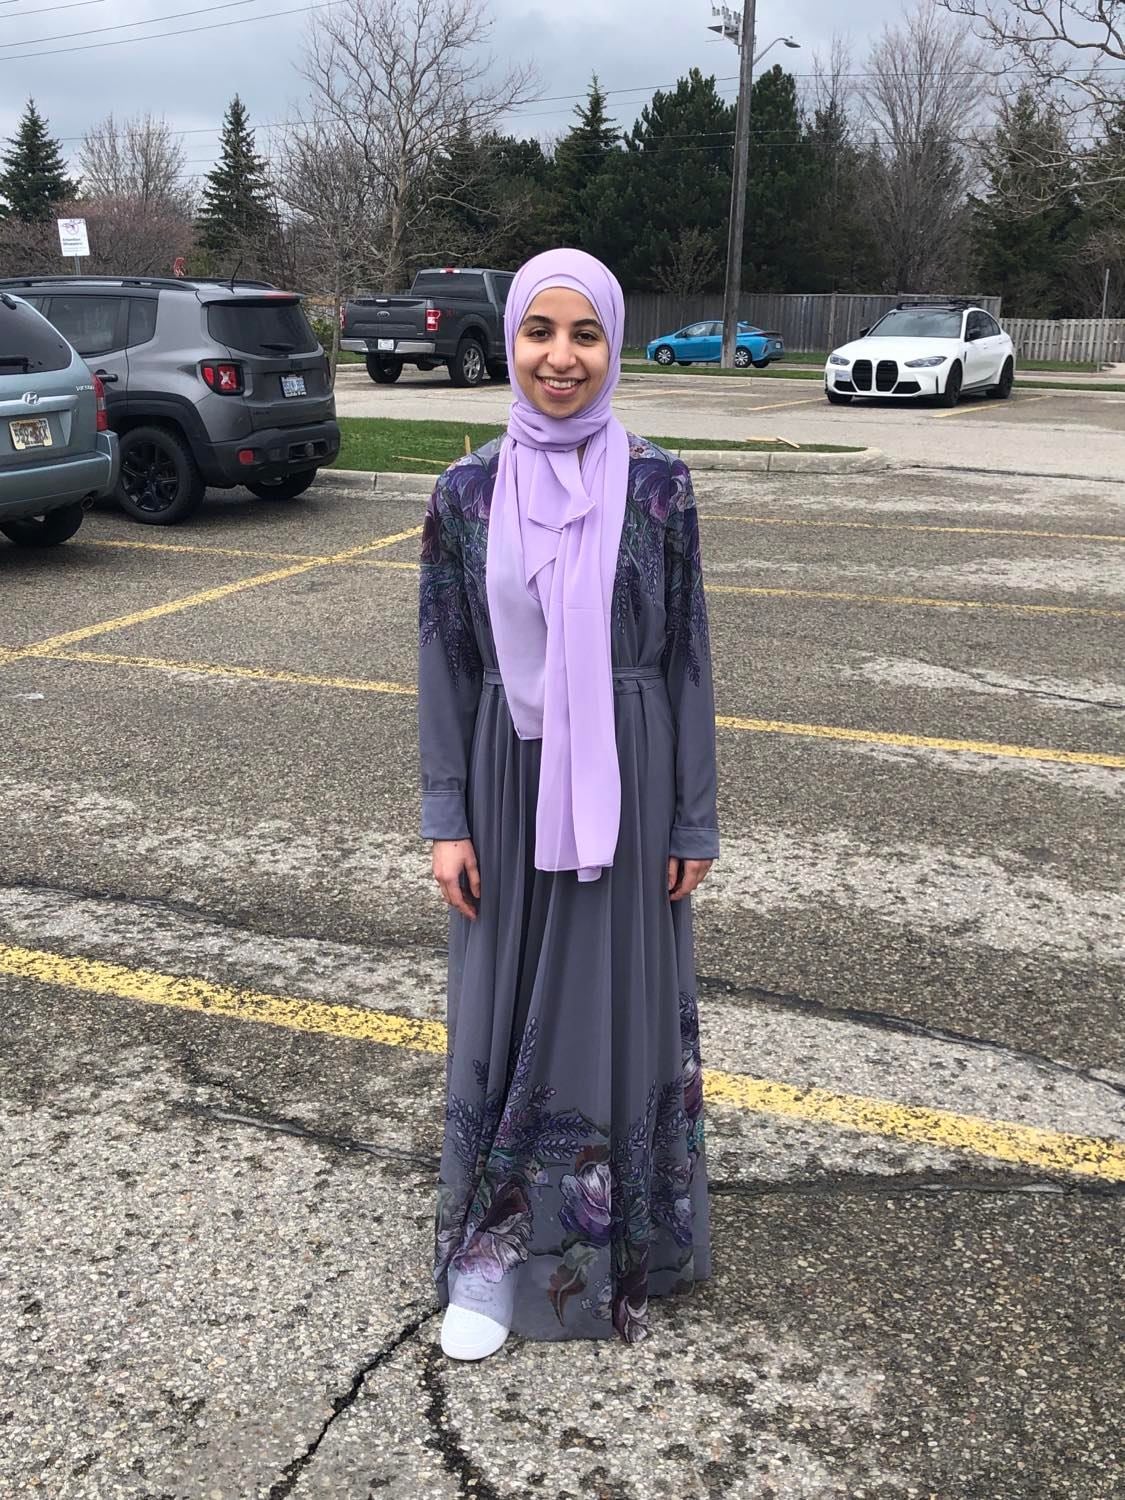 A photo of Fatima standing and smiling in a parking lot wearing a light purple hijab.